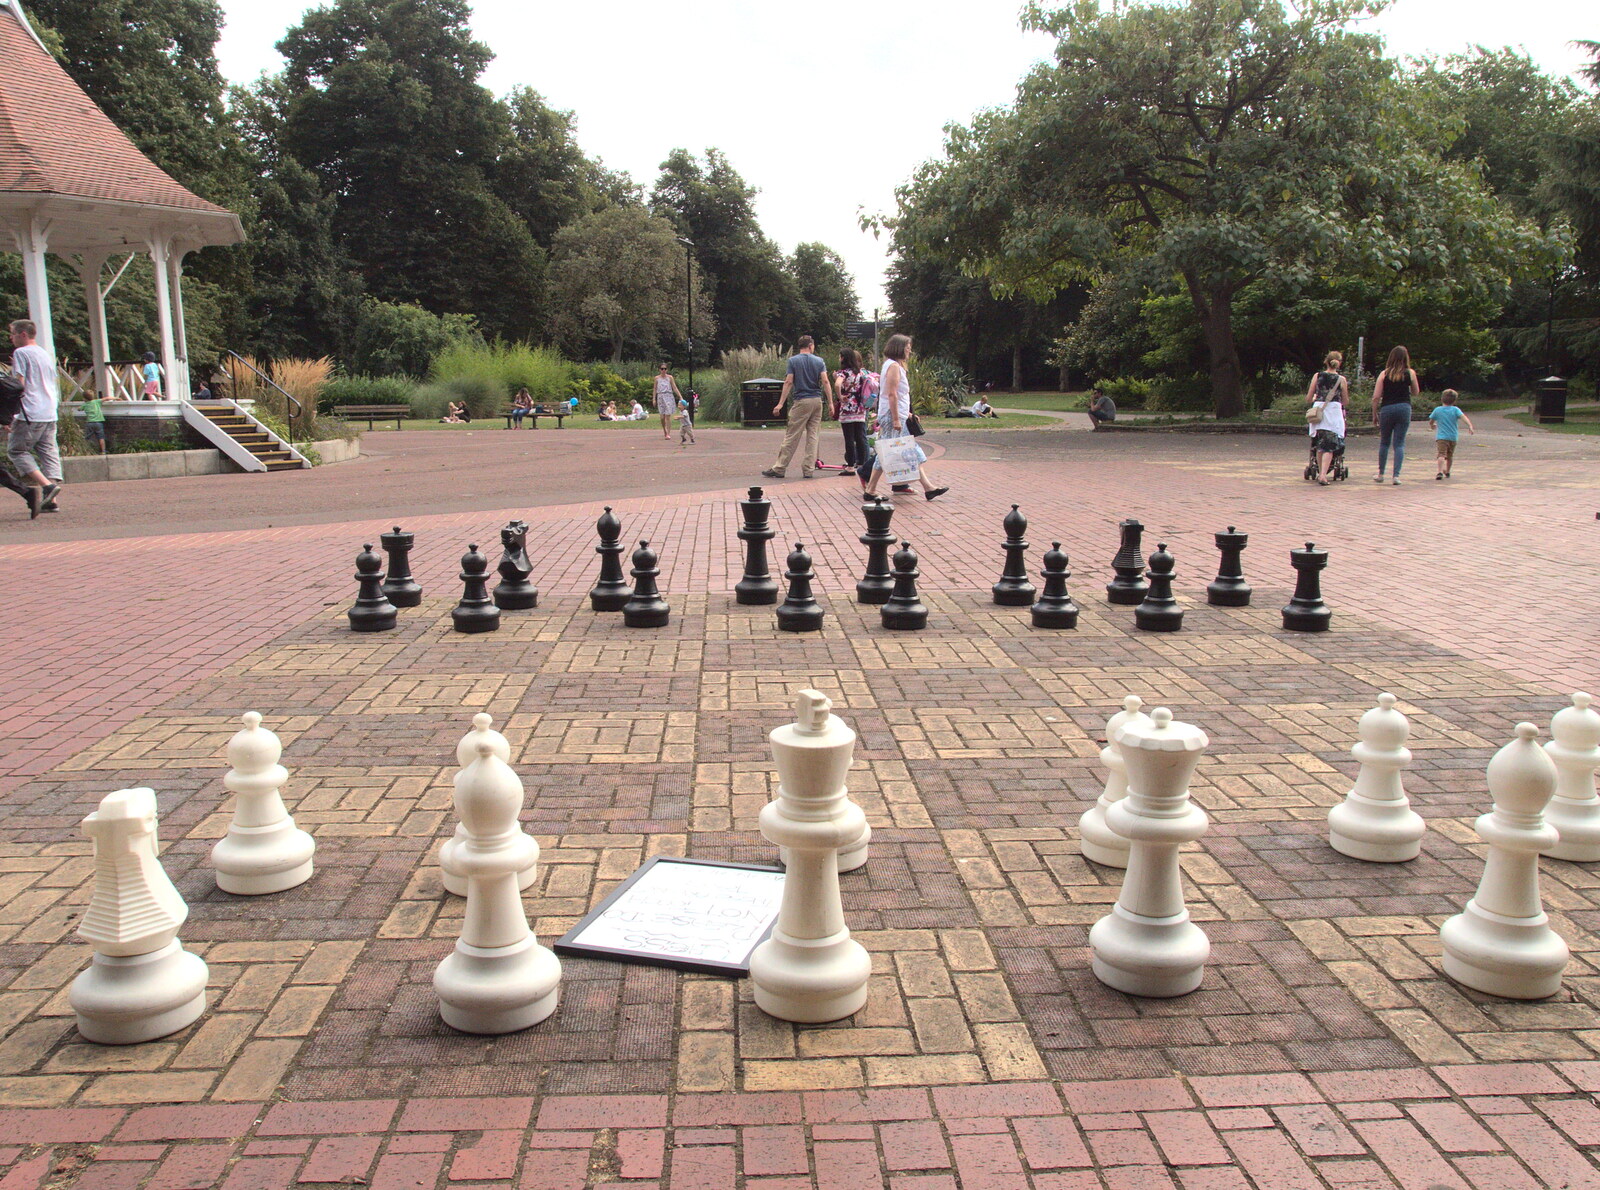 A giant chess set in Chapelfield Park from Swordfights at Norwich Castle, Norwich, Norfolk - 31st August 2016